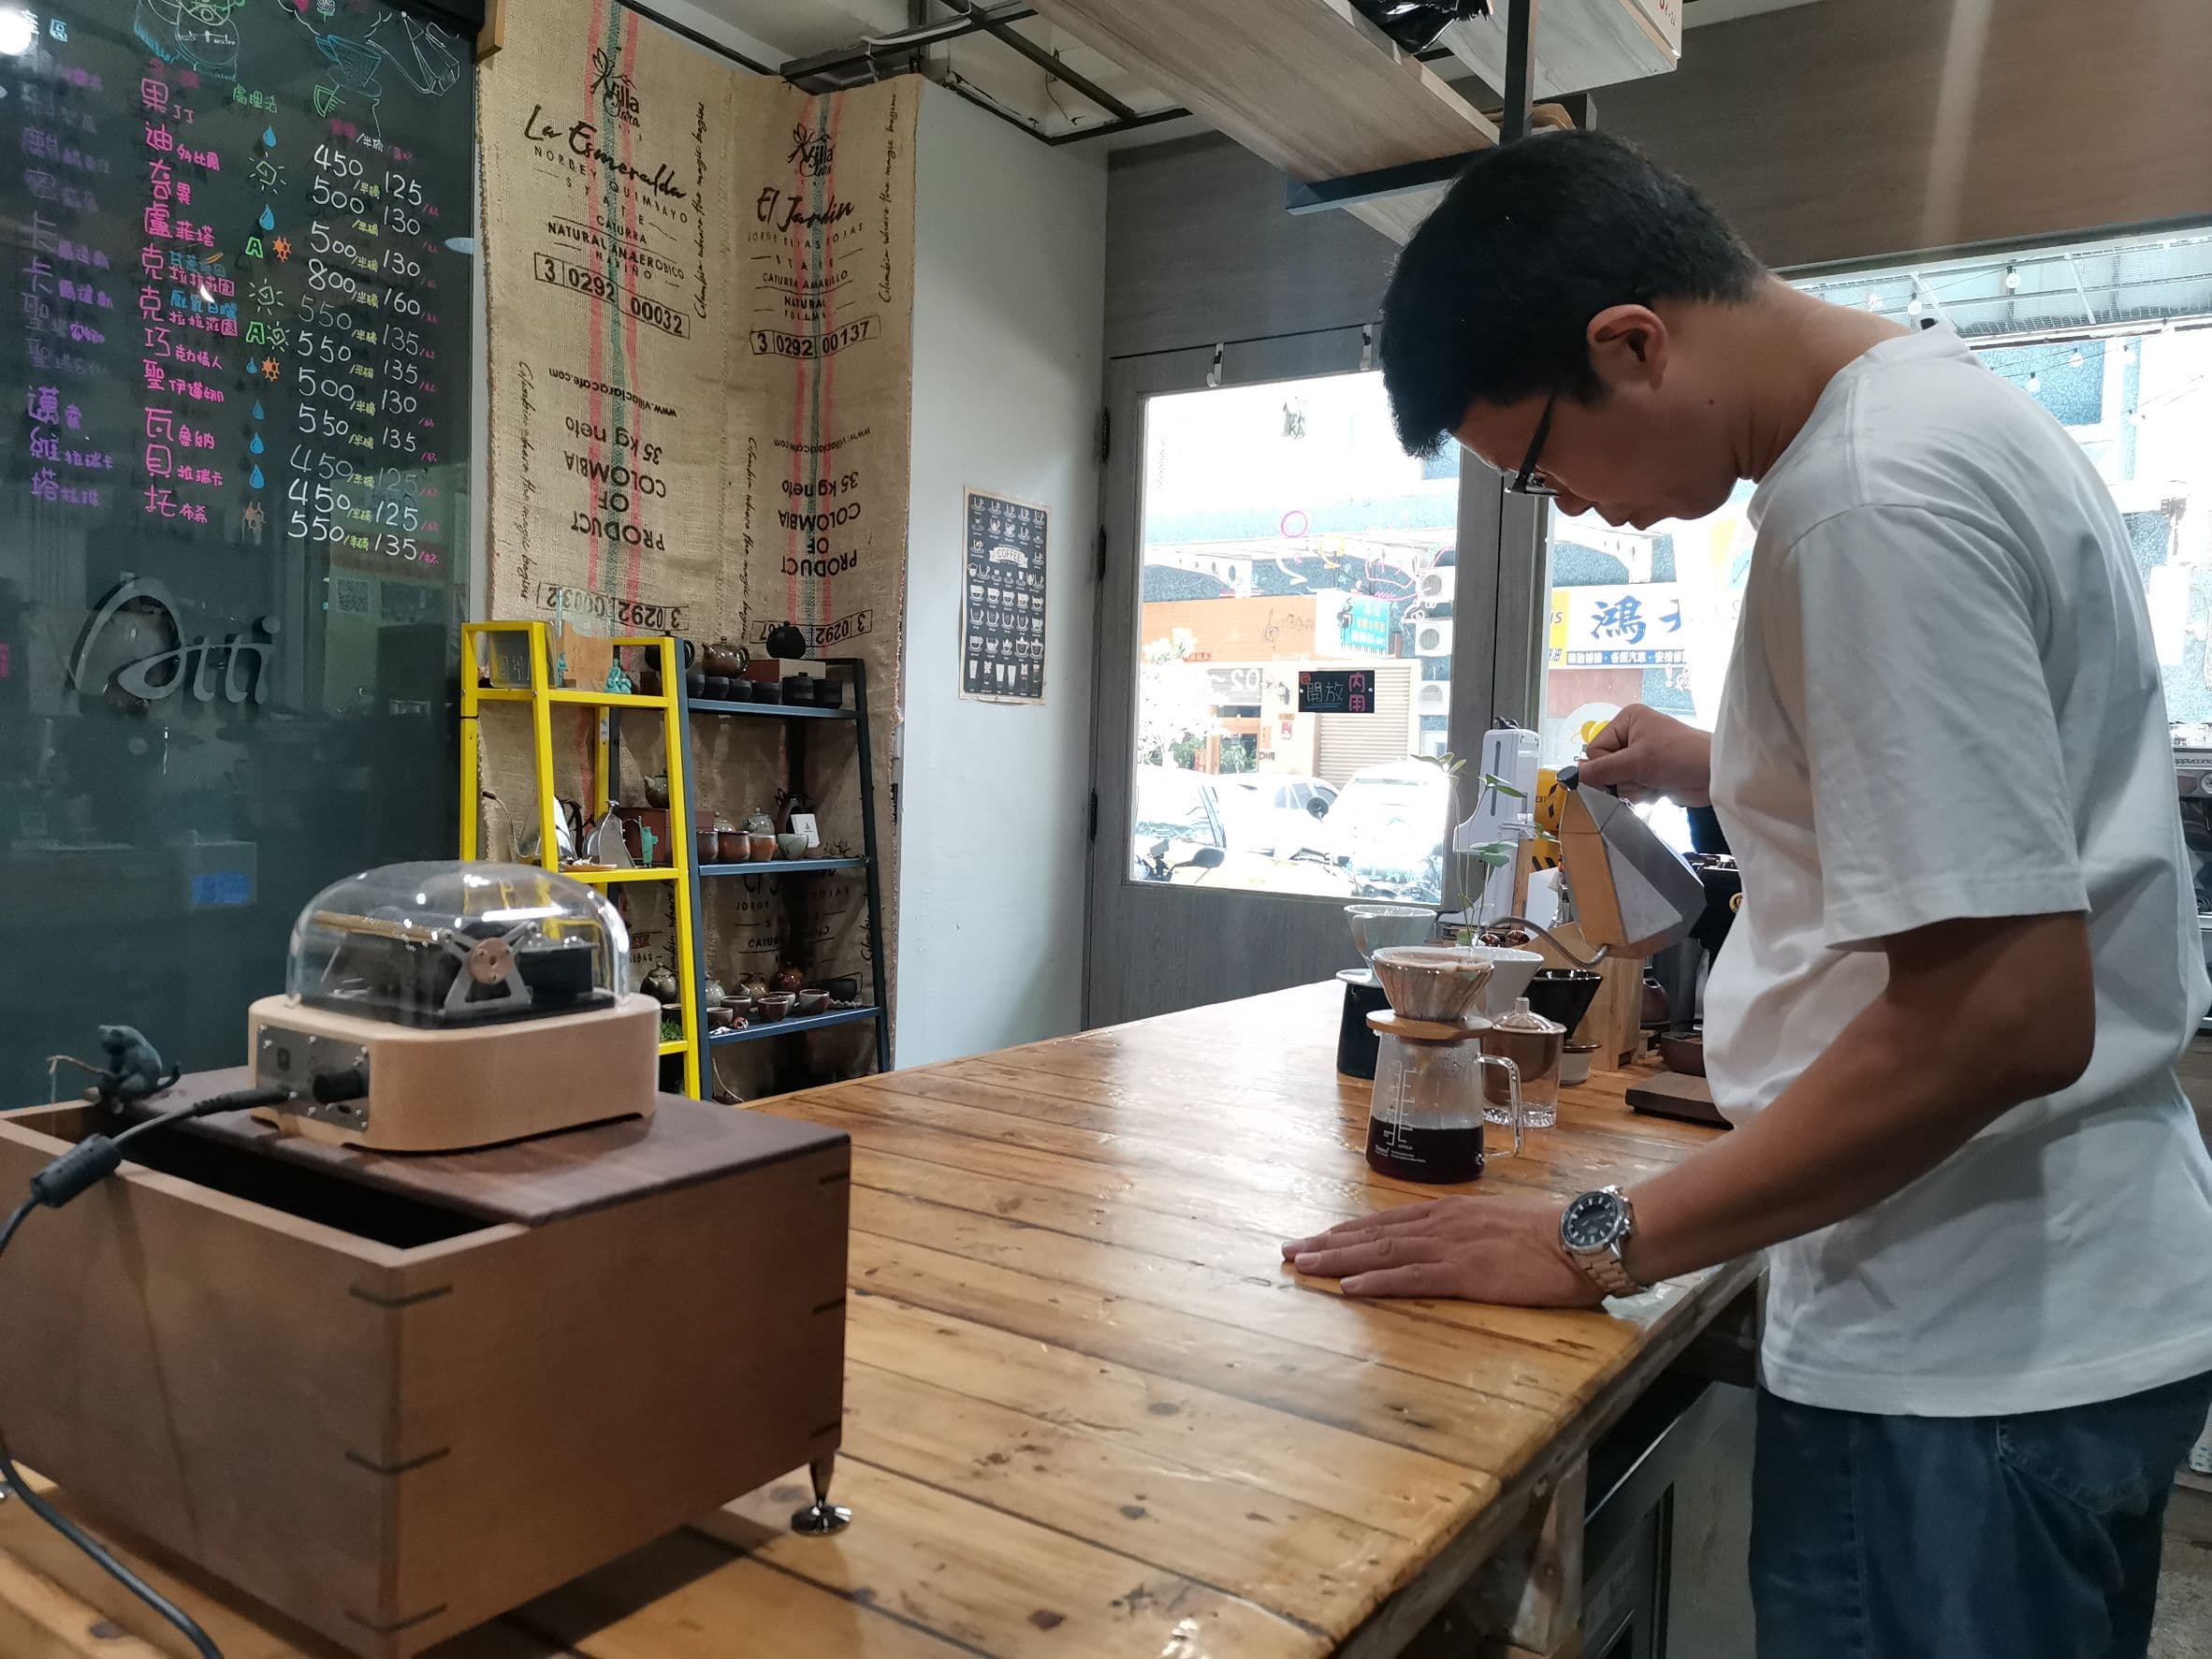 The smart music box Muro Box and the Atti coffee shop owner Lin Jianhao at work.